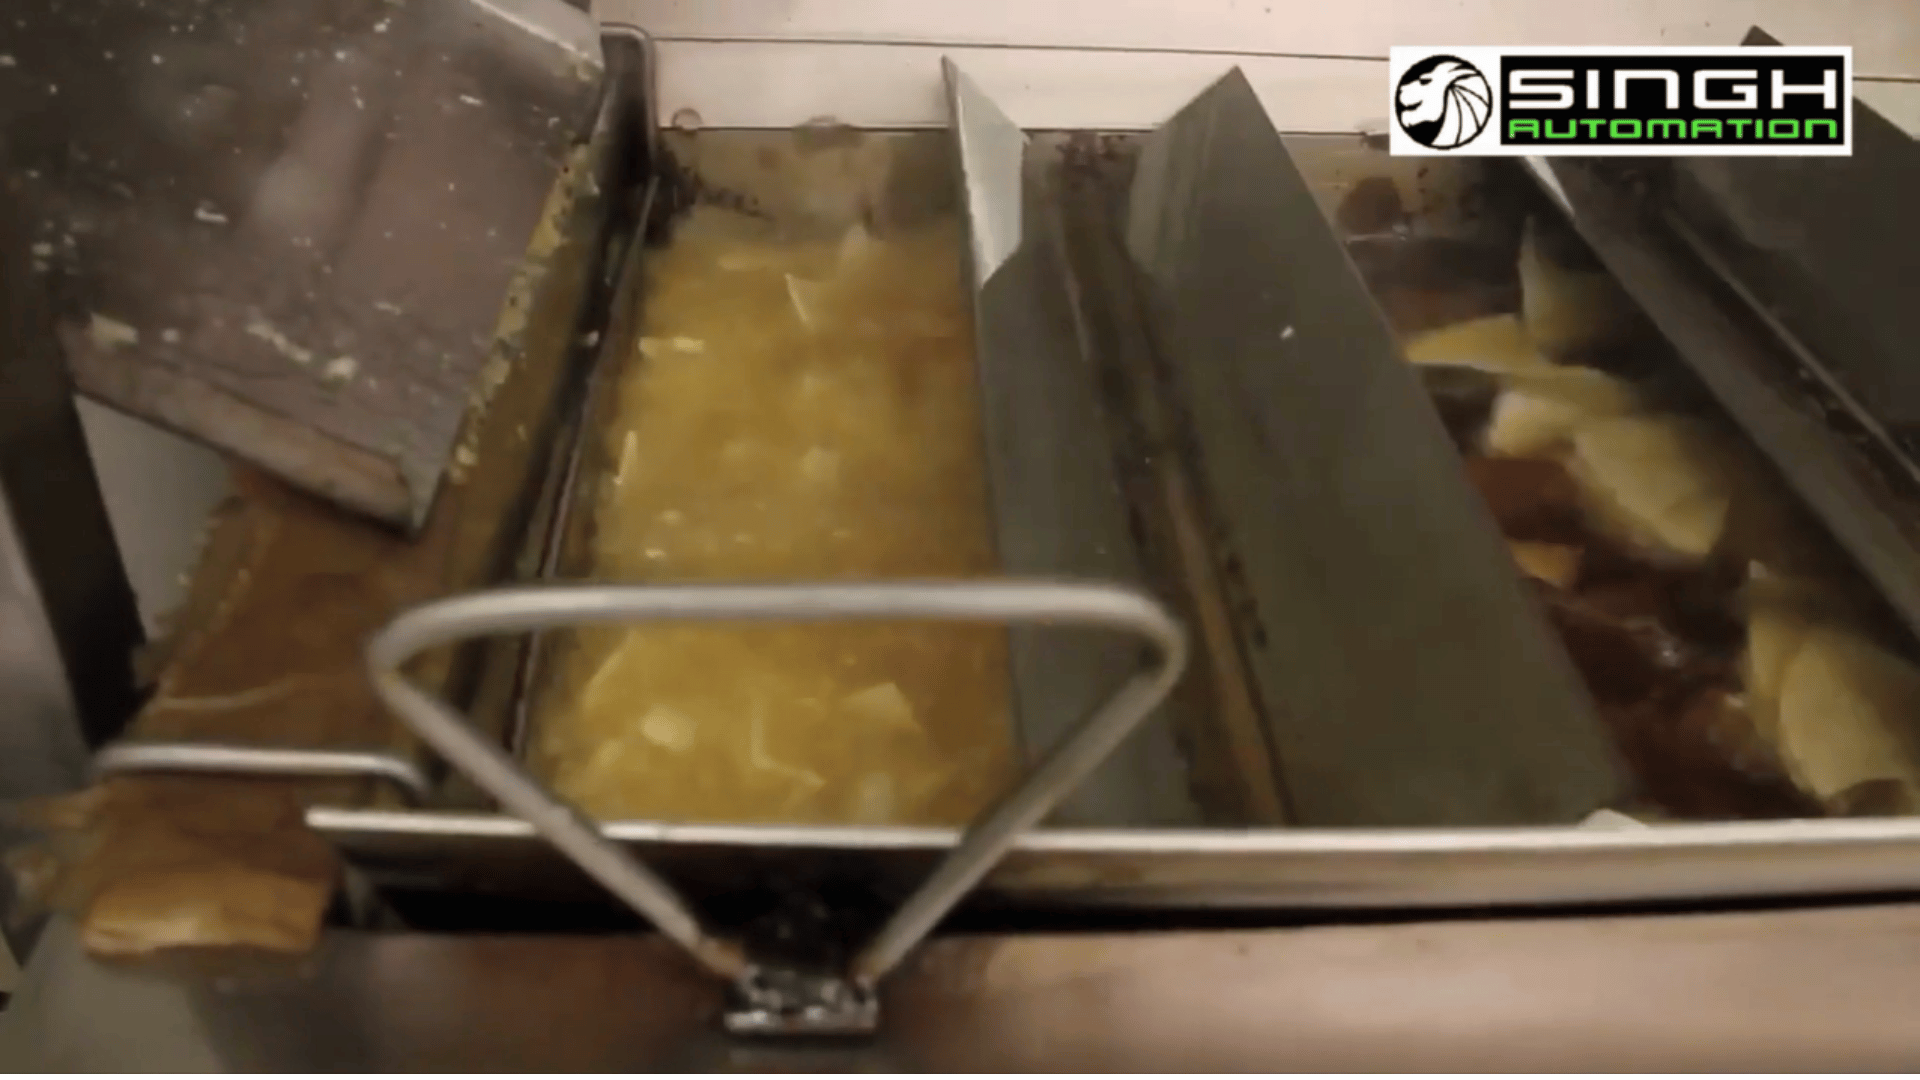 Read more about the article Automated Nacho Fryer